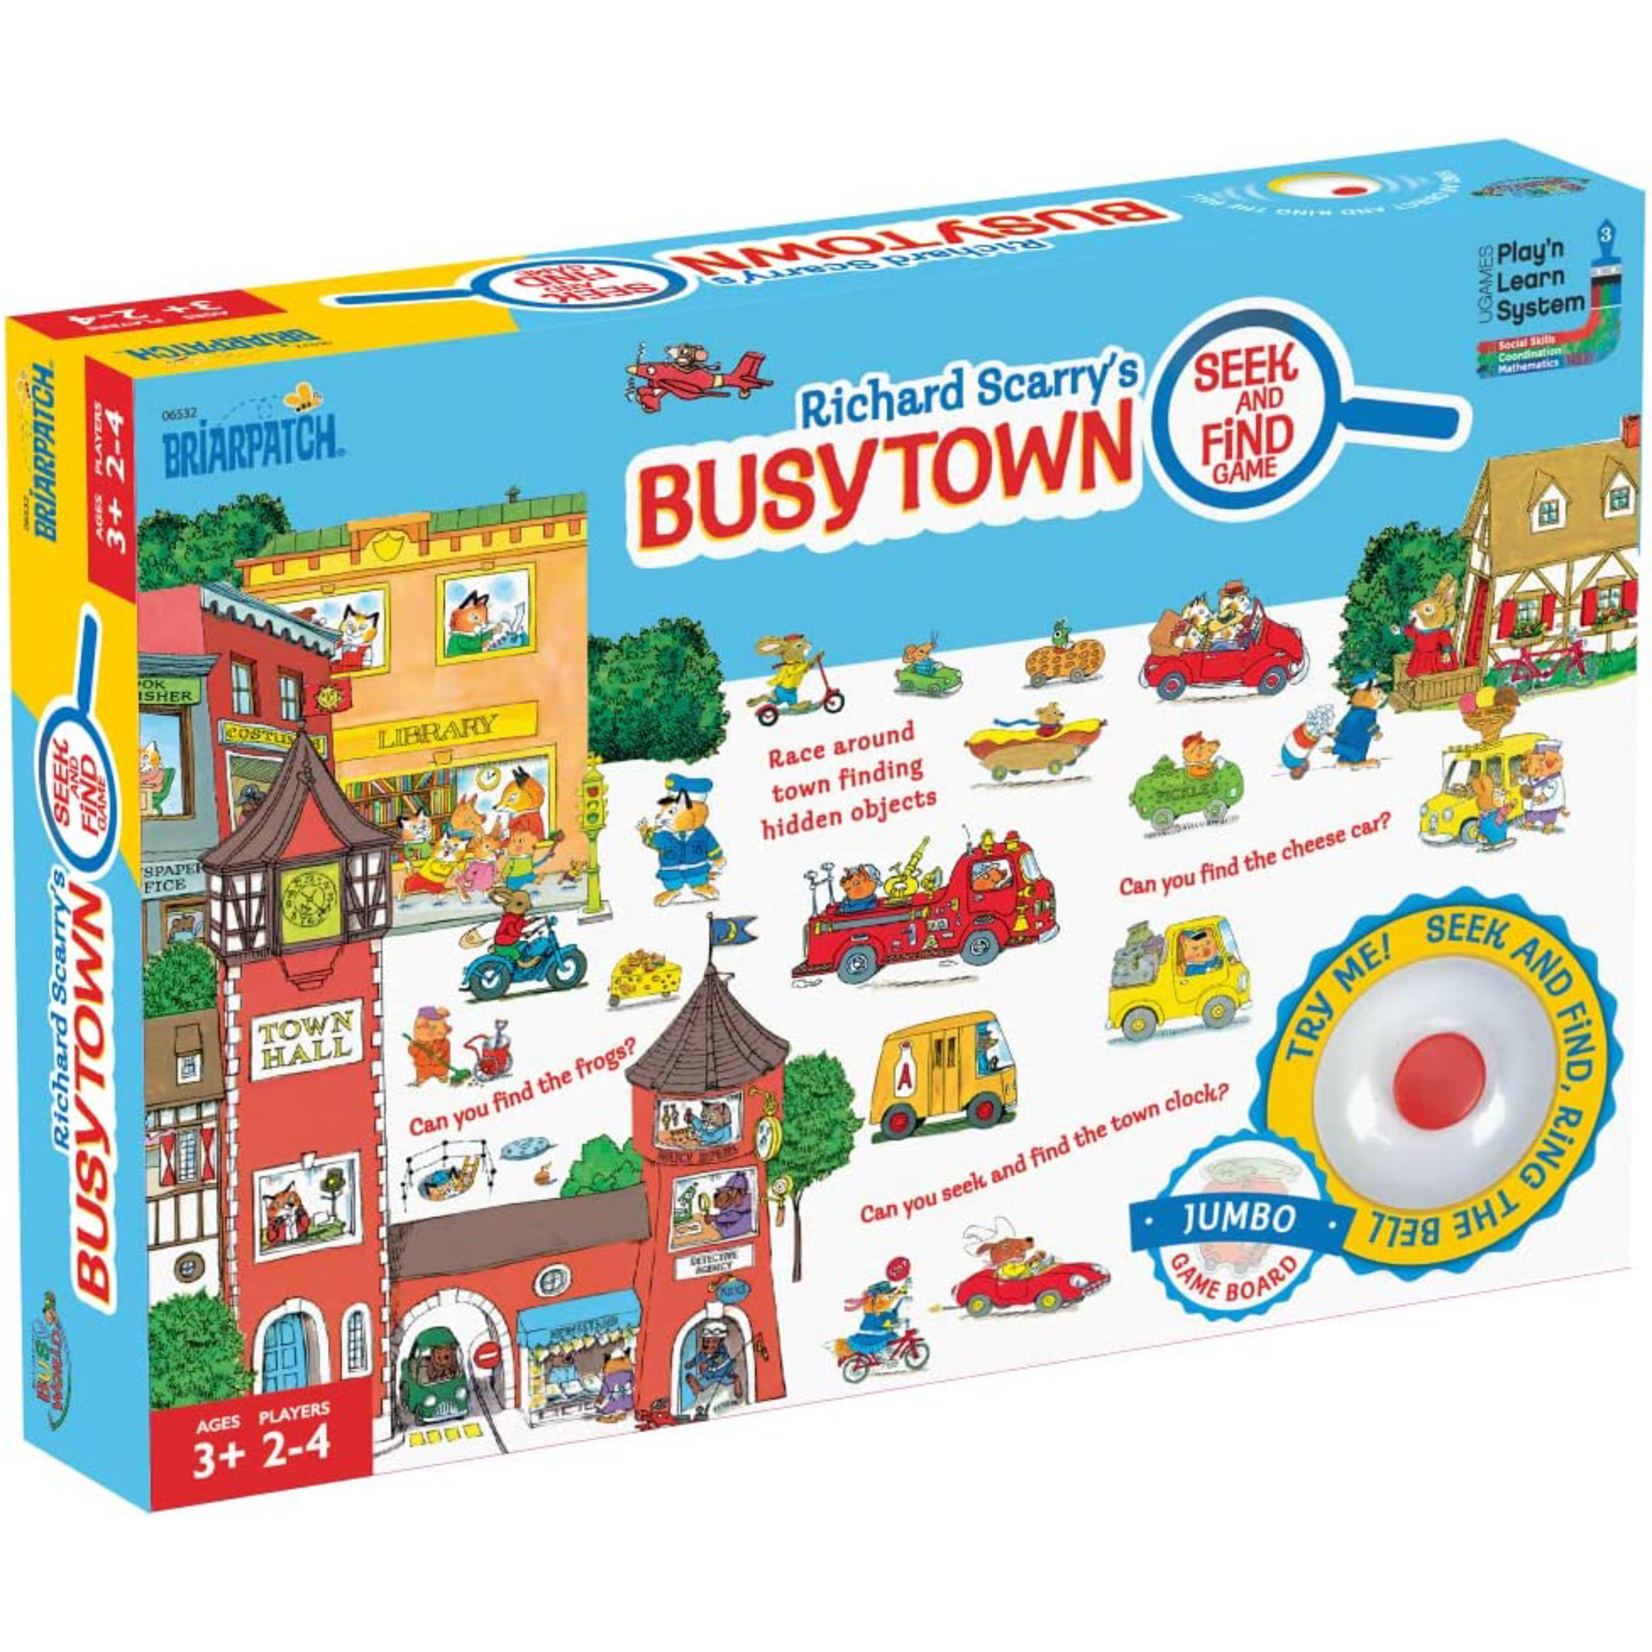 University Games-Richard Scarry’s Busytown Seek and Find Game-06532-Legacy Toys